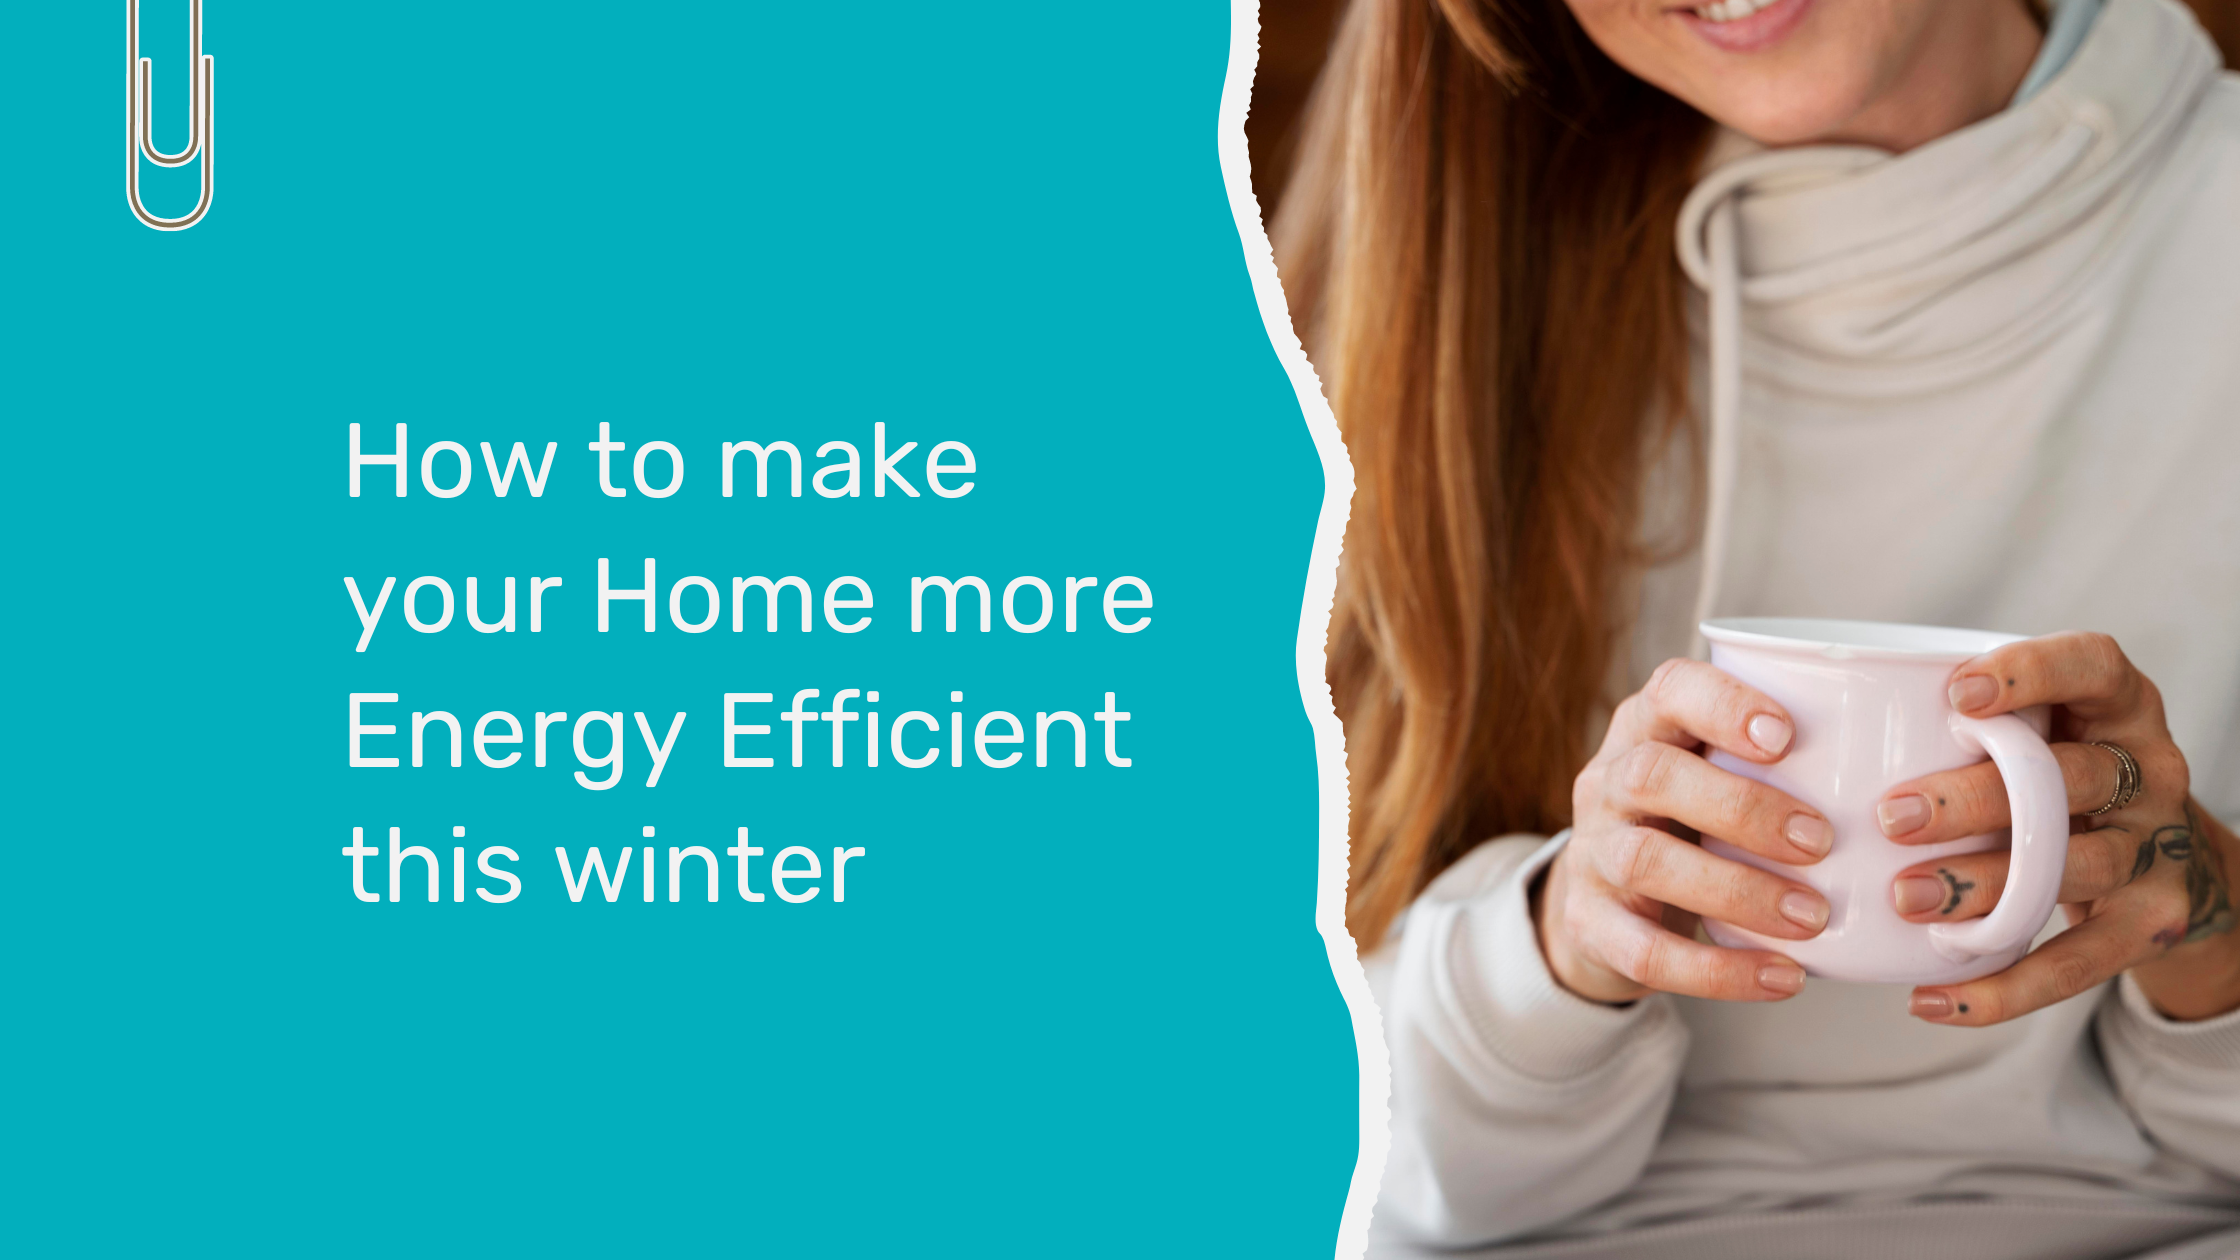 How to make your Home more Energy Efficient this winter